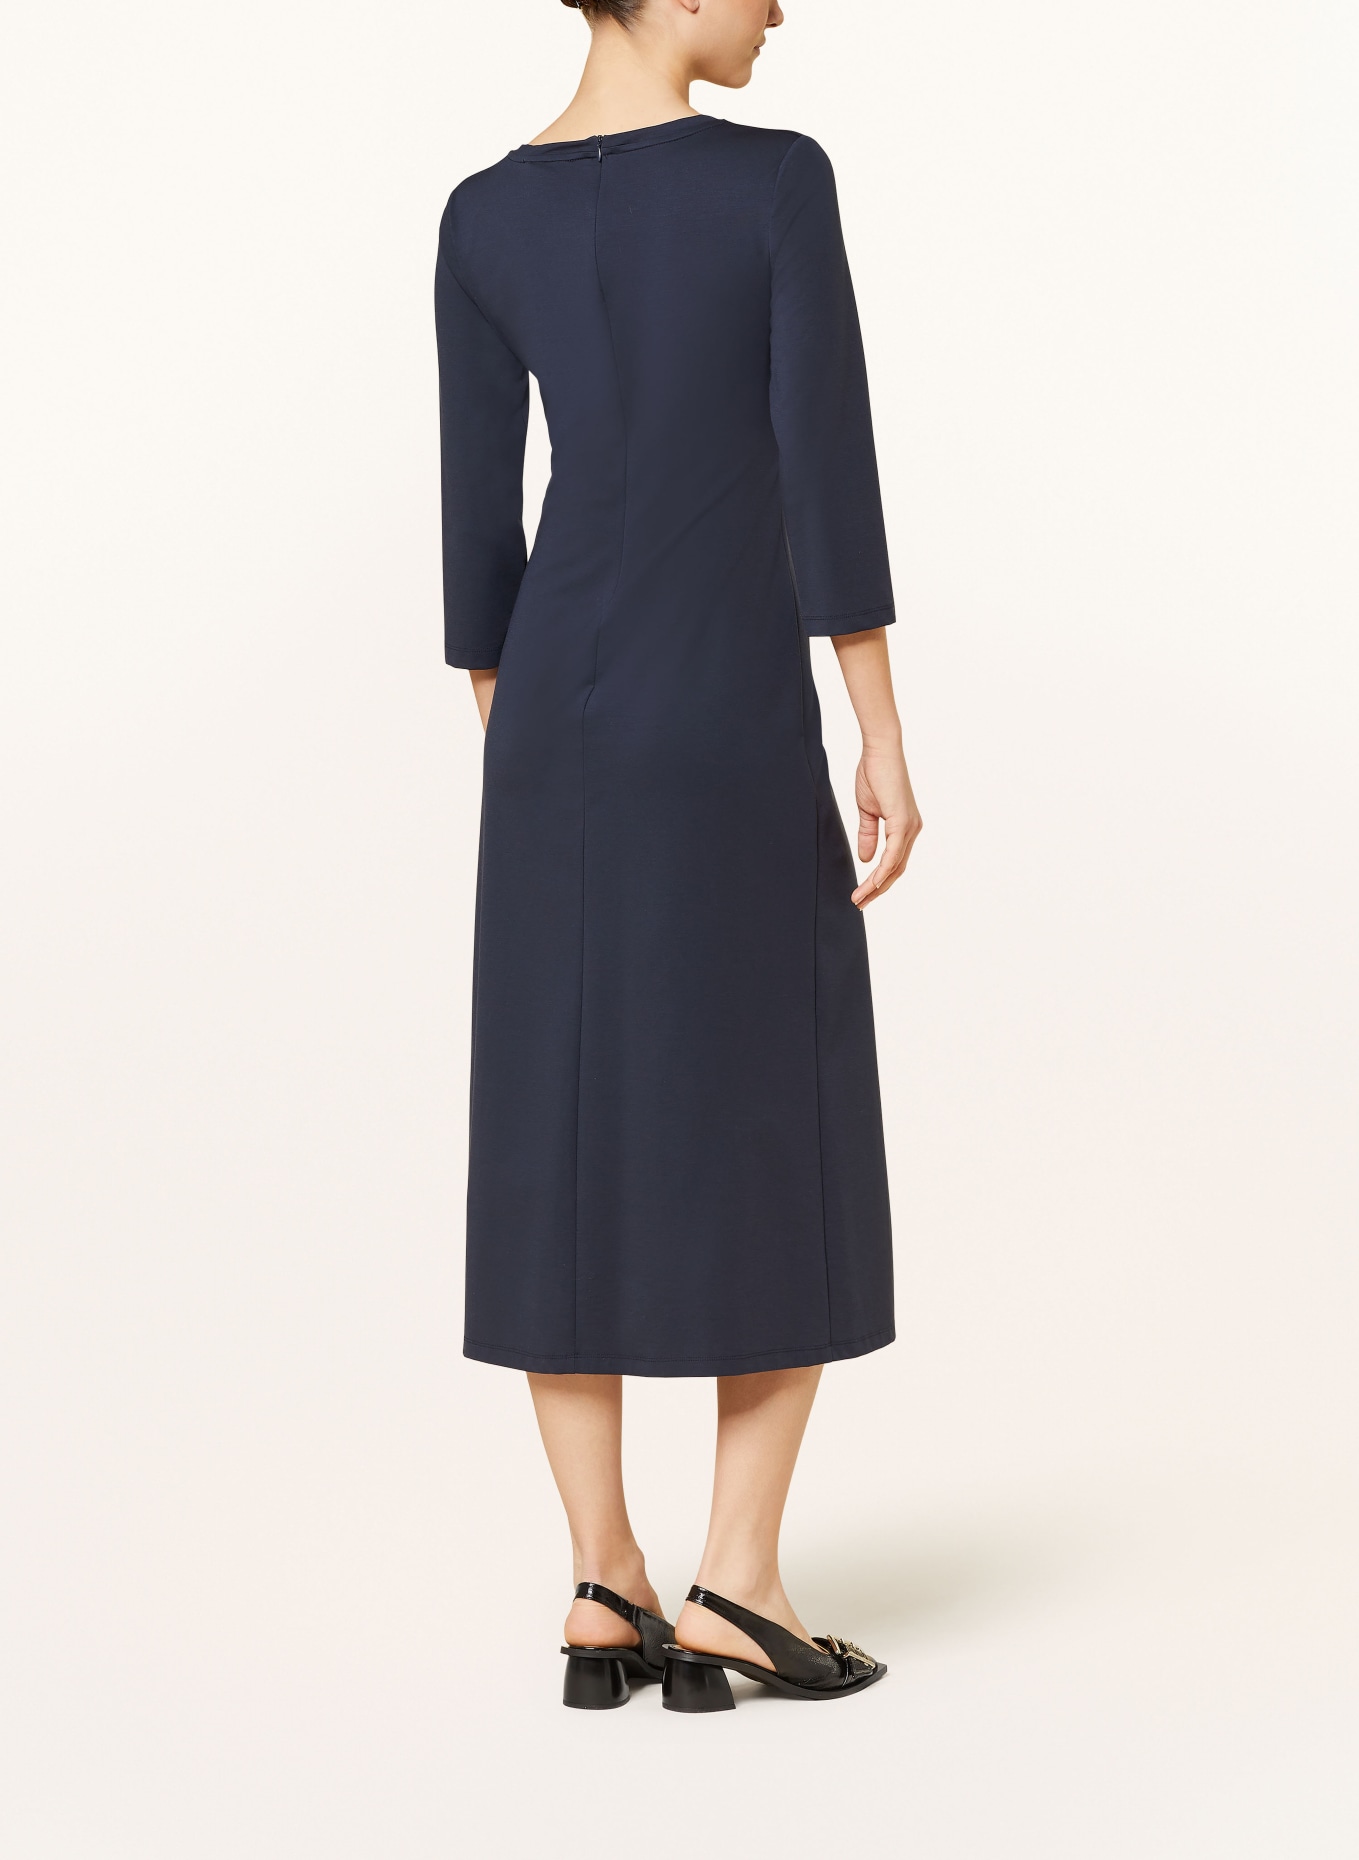 WEEKEND MaxMara Jersey dress GESSY with 3/4 sleeves, Color: 004 NAVY (Image 3)